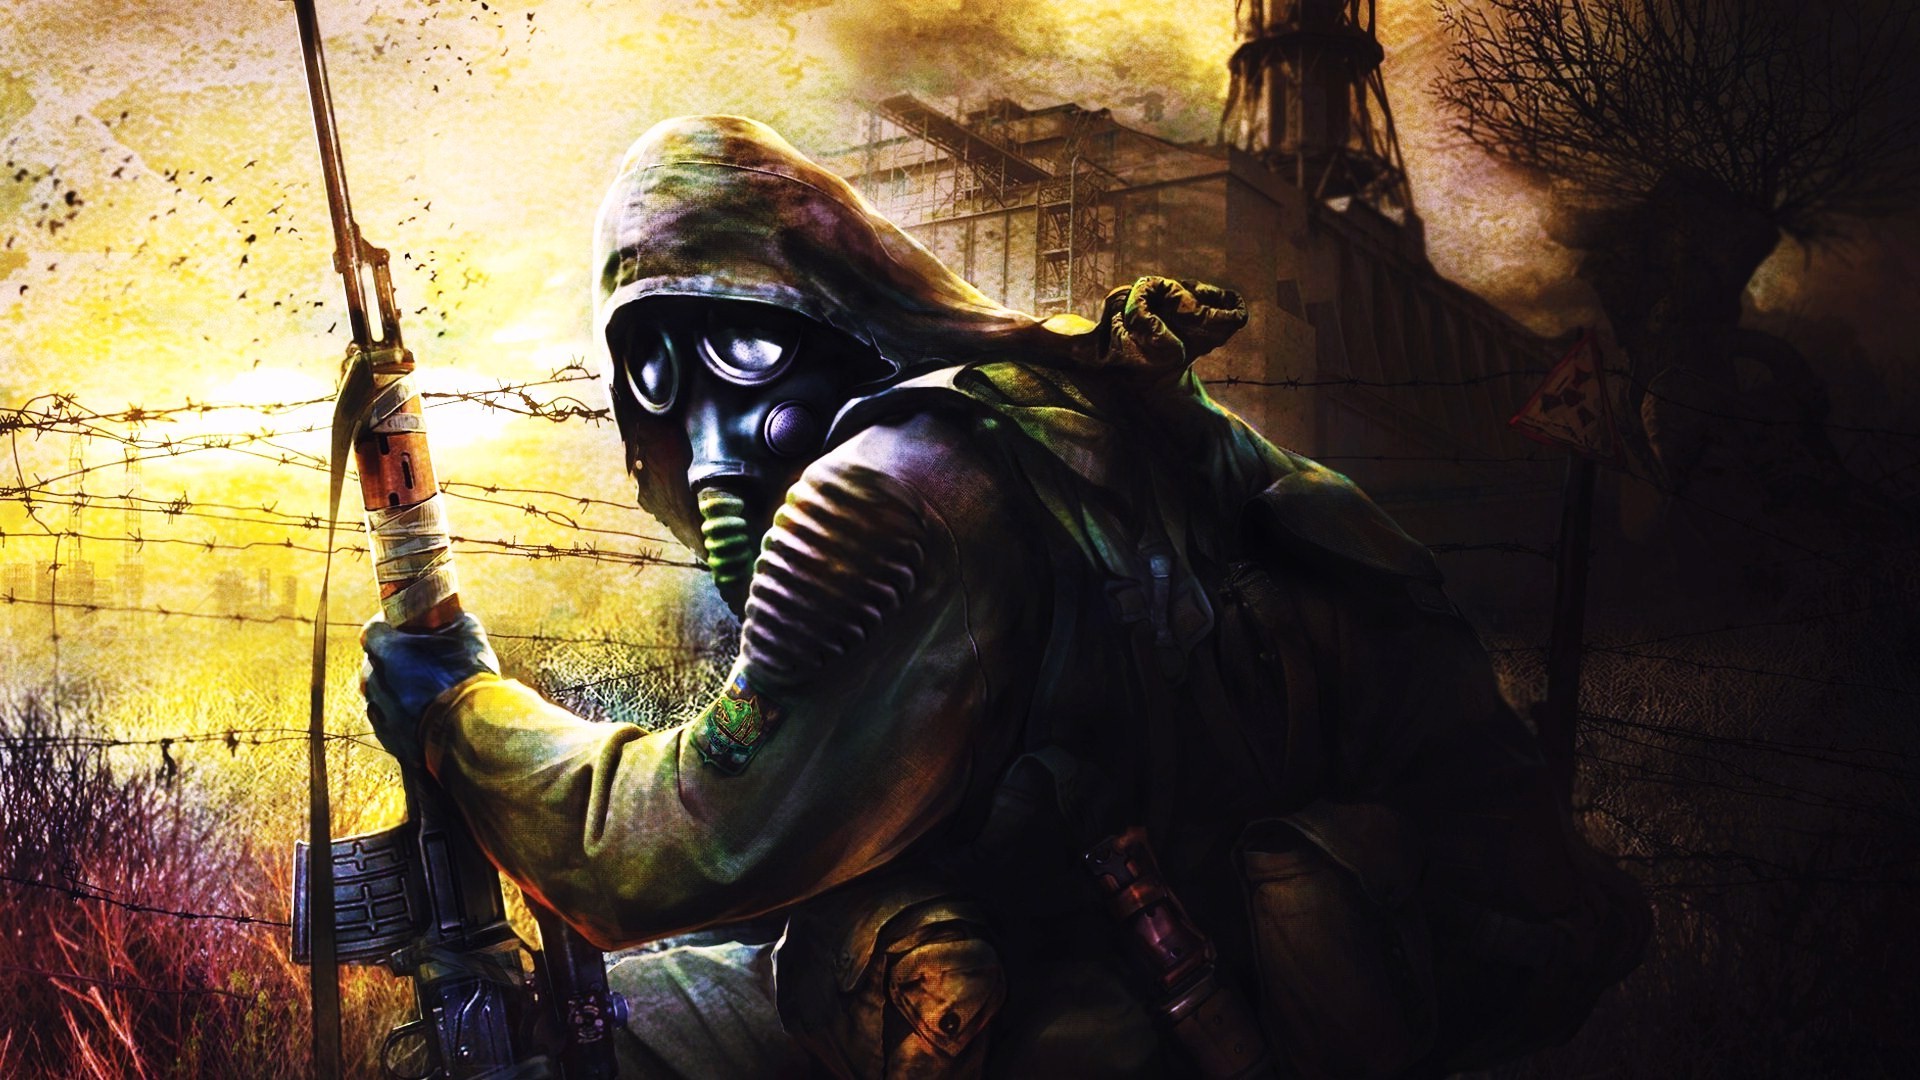 Shadow Of Chernobyl, Apocalyptic, S.T.A.L.K.E.R.: Shadow Of Chernobyl, Video Games Wallpaper